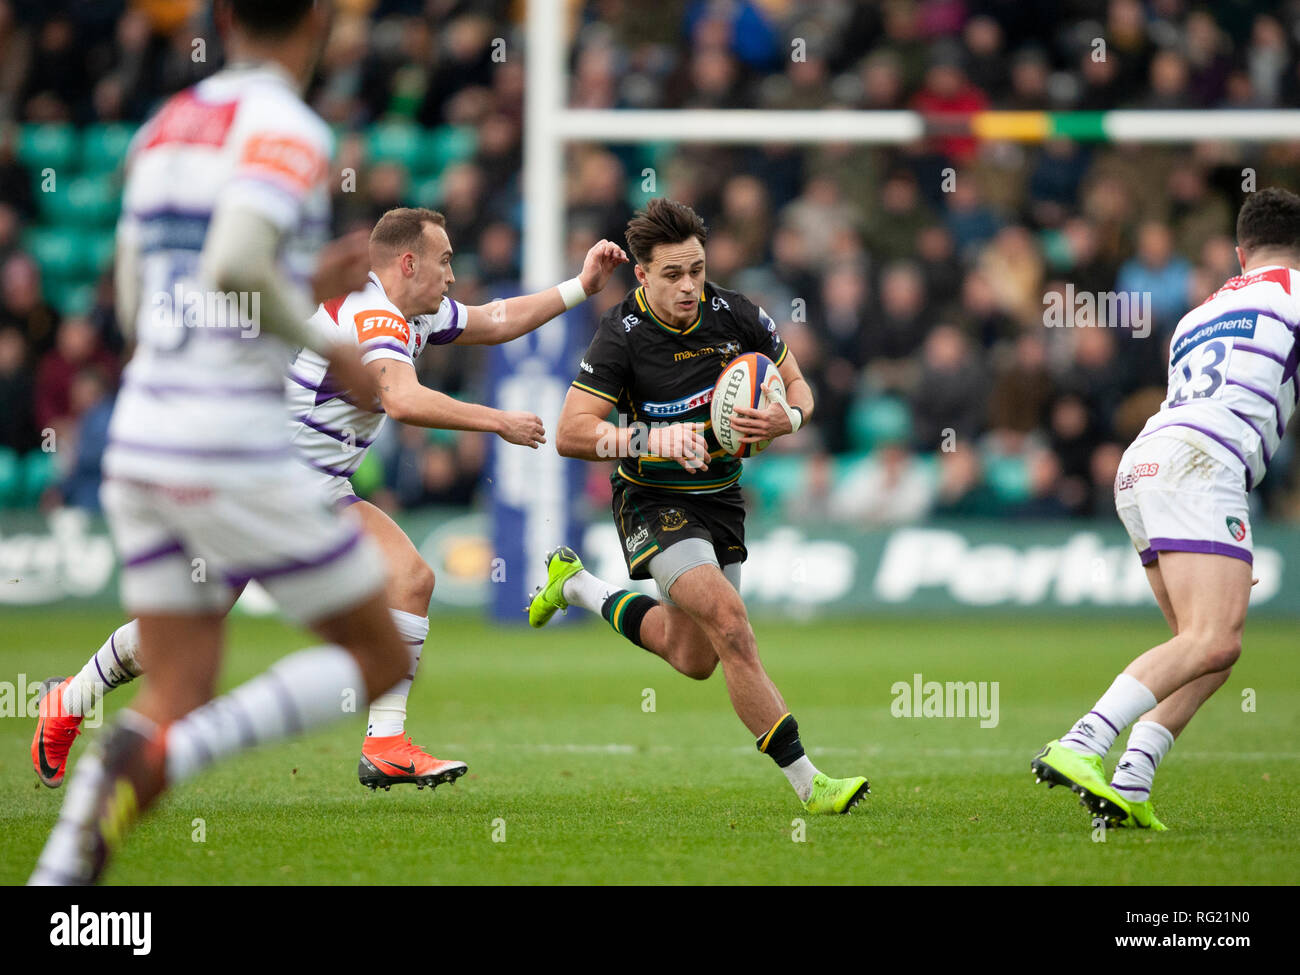 Northampton, UK. 26th January 2019. Tom Collins of Northampton Saints runs with the ball during the Premiership Rugby Cup match between Northampton Saints and Leicester Tigers. Andrew Taylor/Alamy Live News Stock Photo